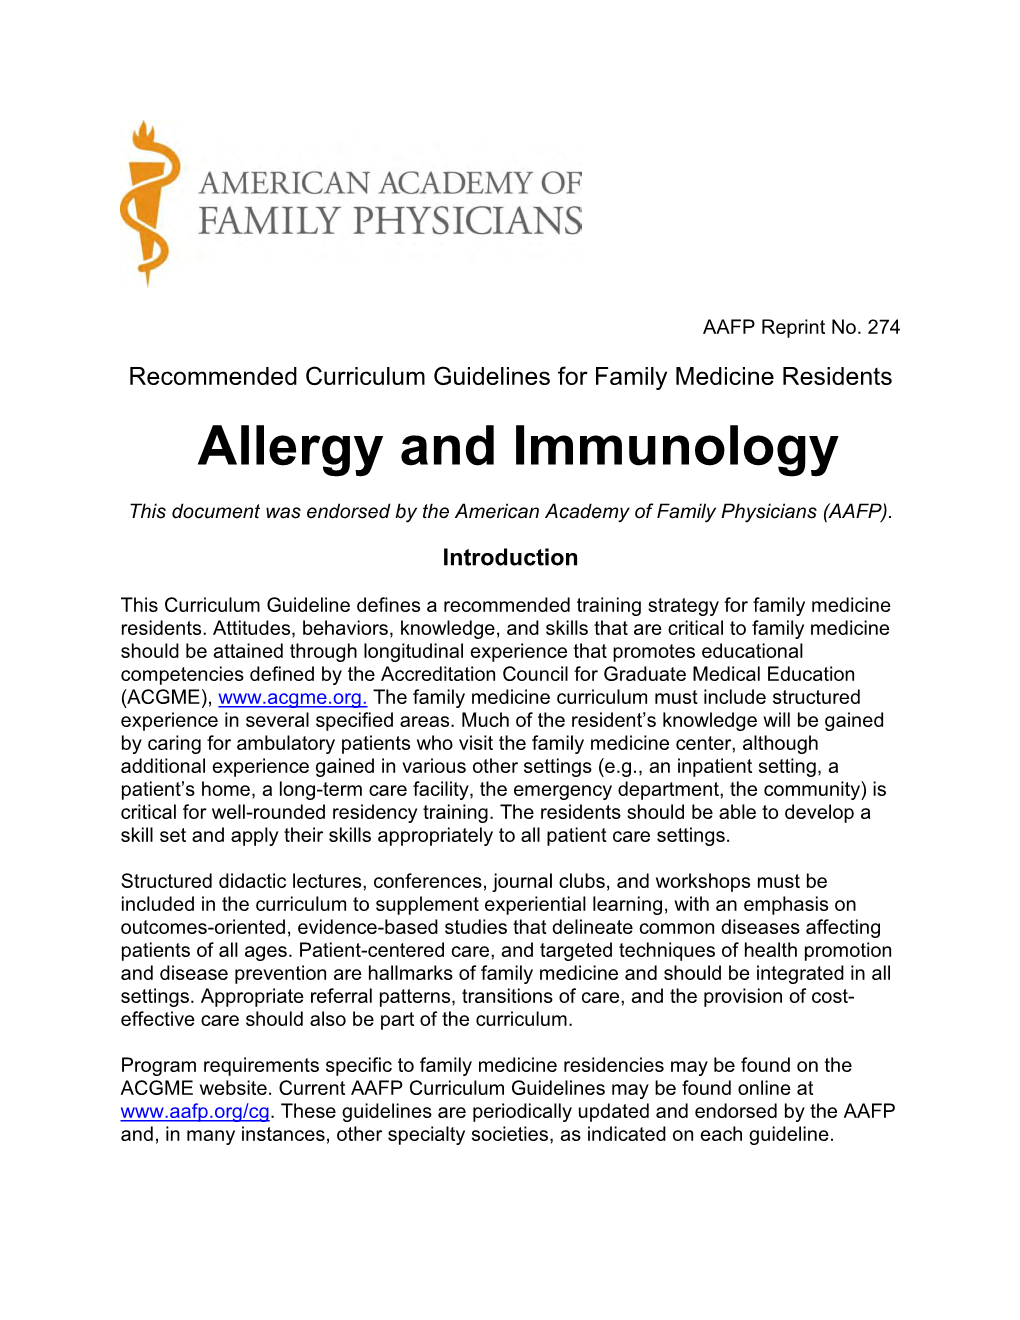 Allergy and Immunology This Document Was Endorsed by the American Academy of Family Physicians (AAFP)